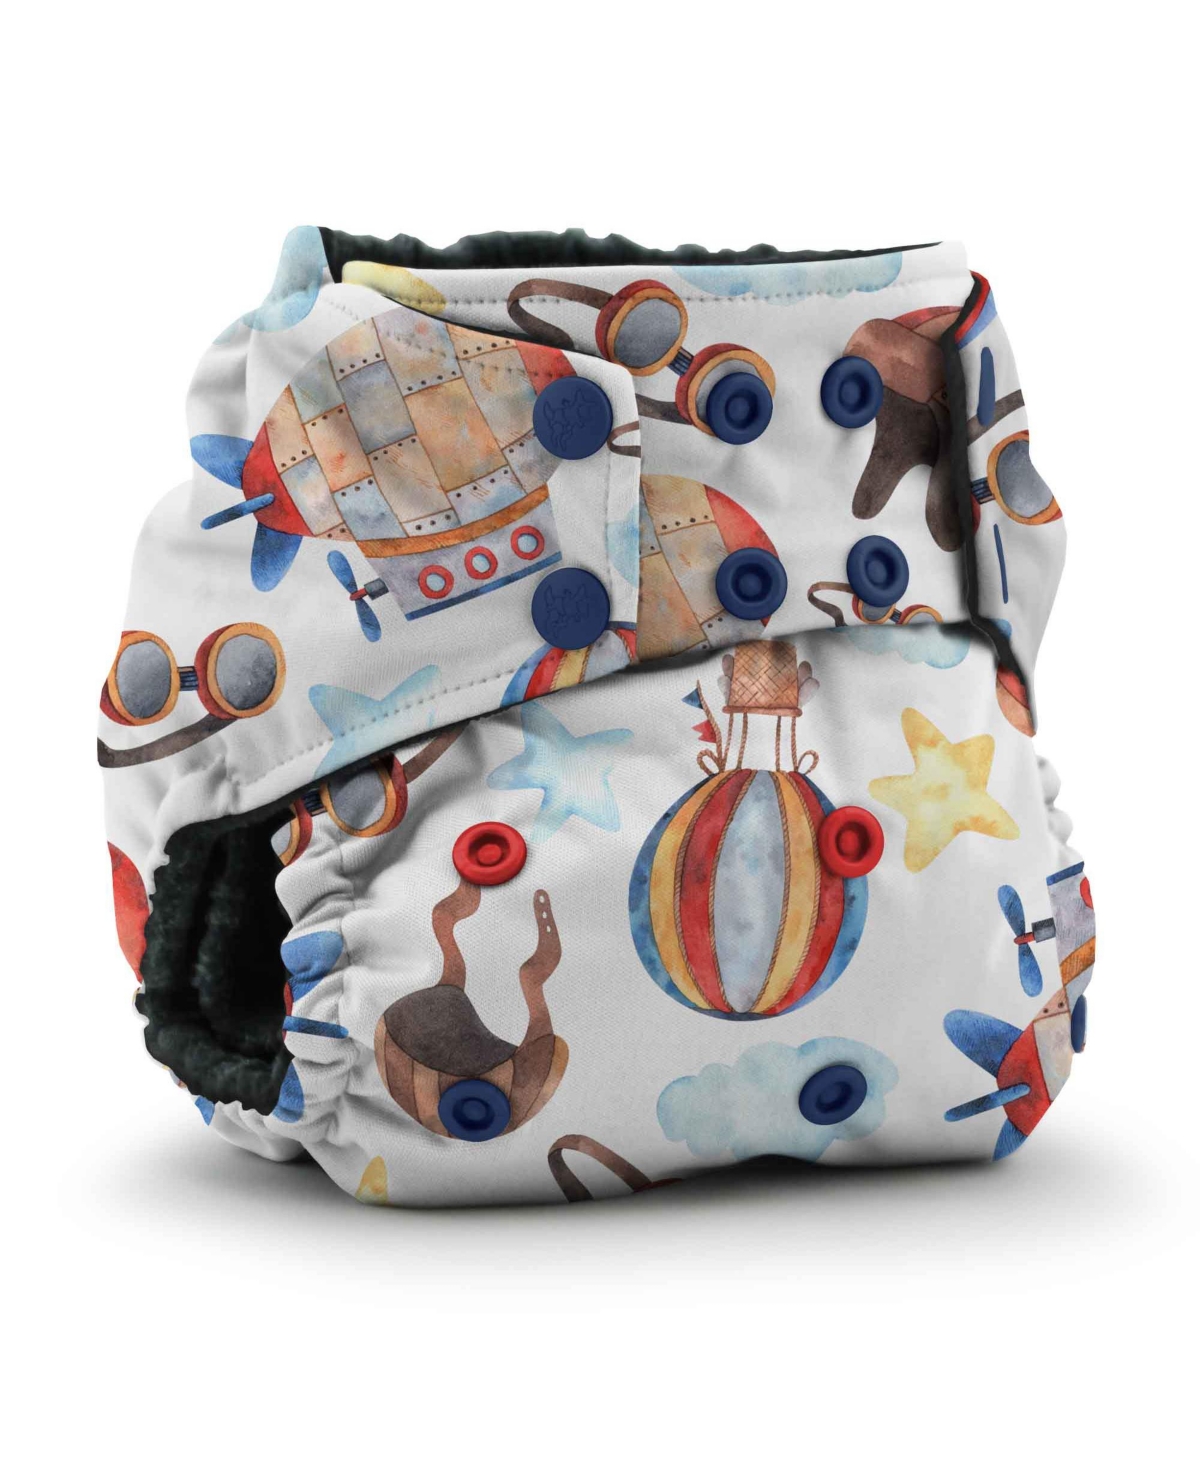 Kanga Care Kids' Rumparooz Obv (organic Rayon From Bamboo Velour) One Size Pocket Cloth Diaper In Zeppelin